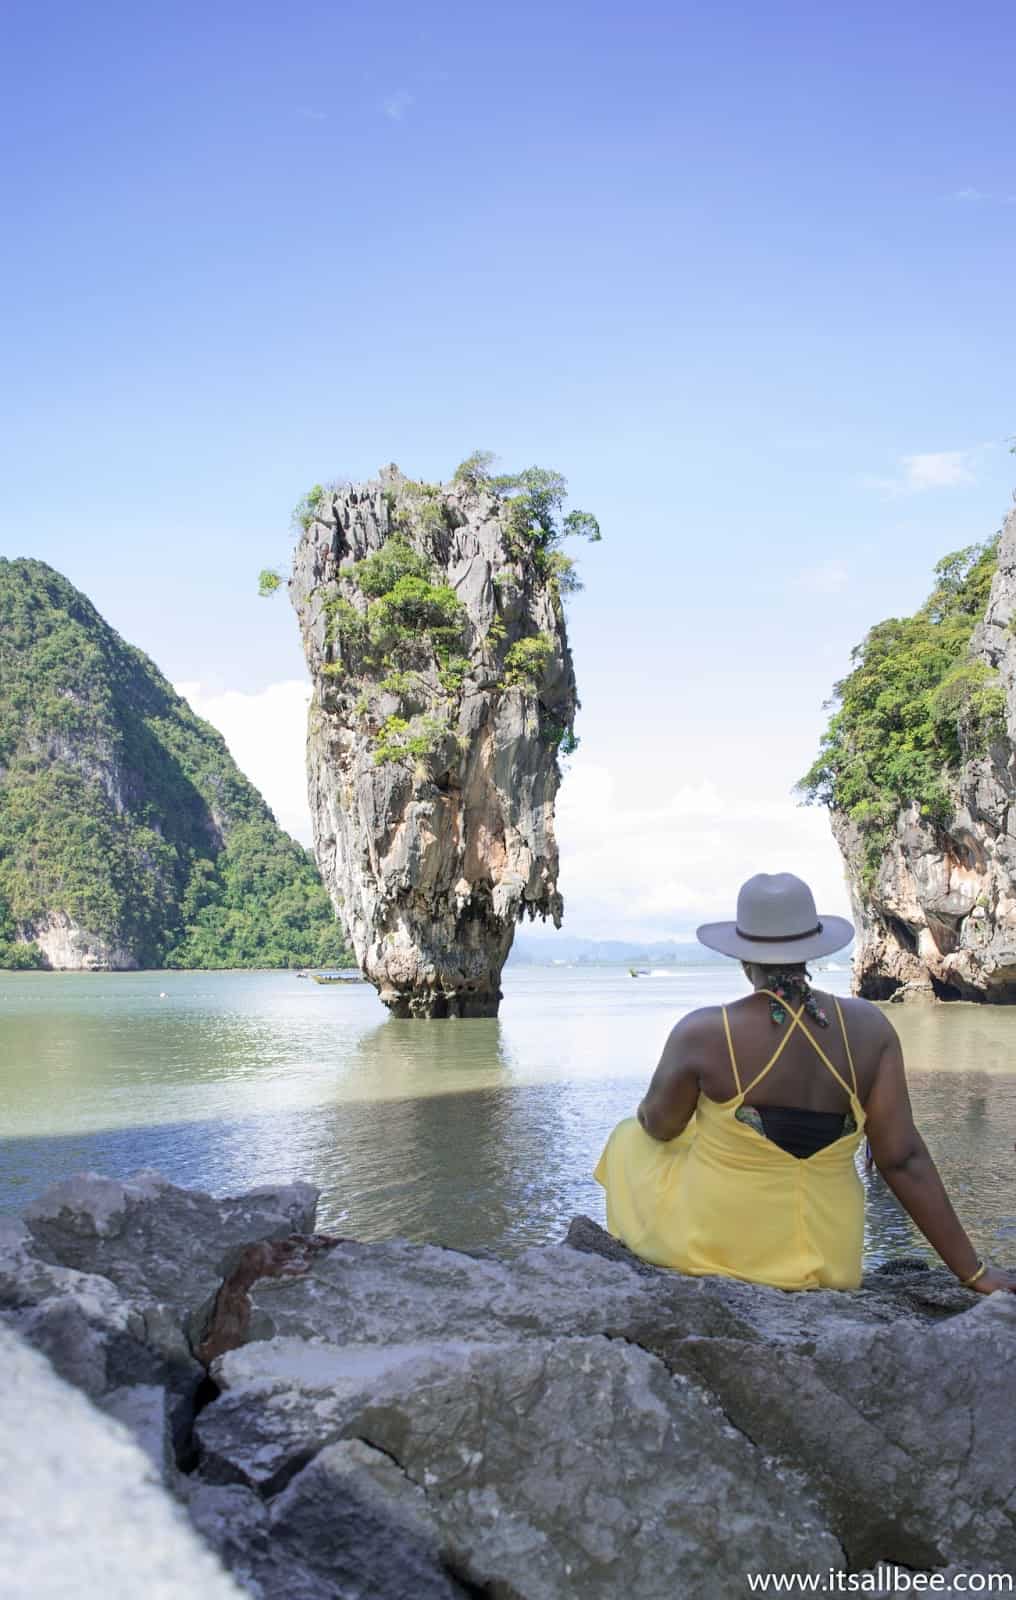 The Perfect 3 Weeks In Thailand Itinerary - Things to do in Thailand for 3 weeks 